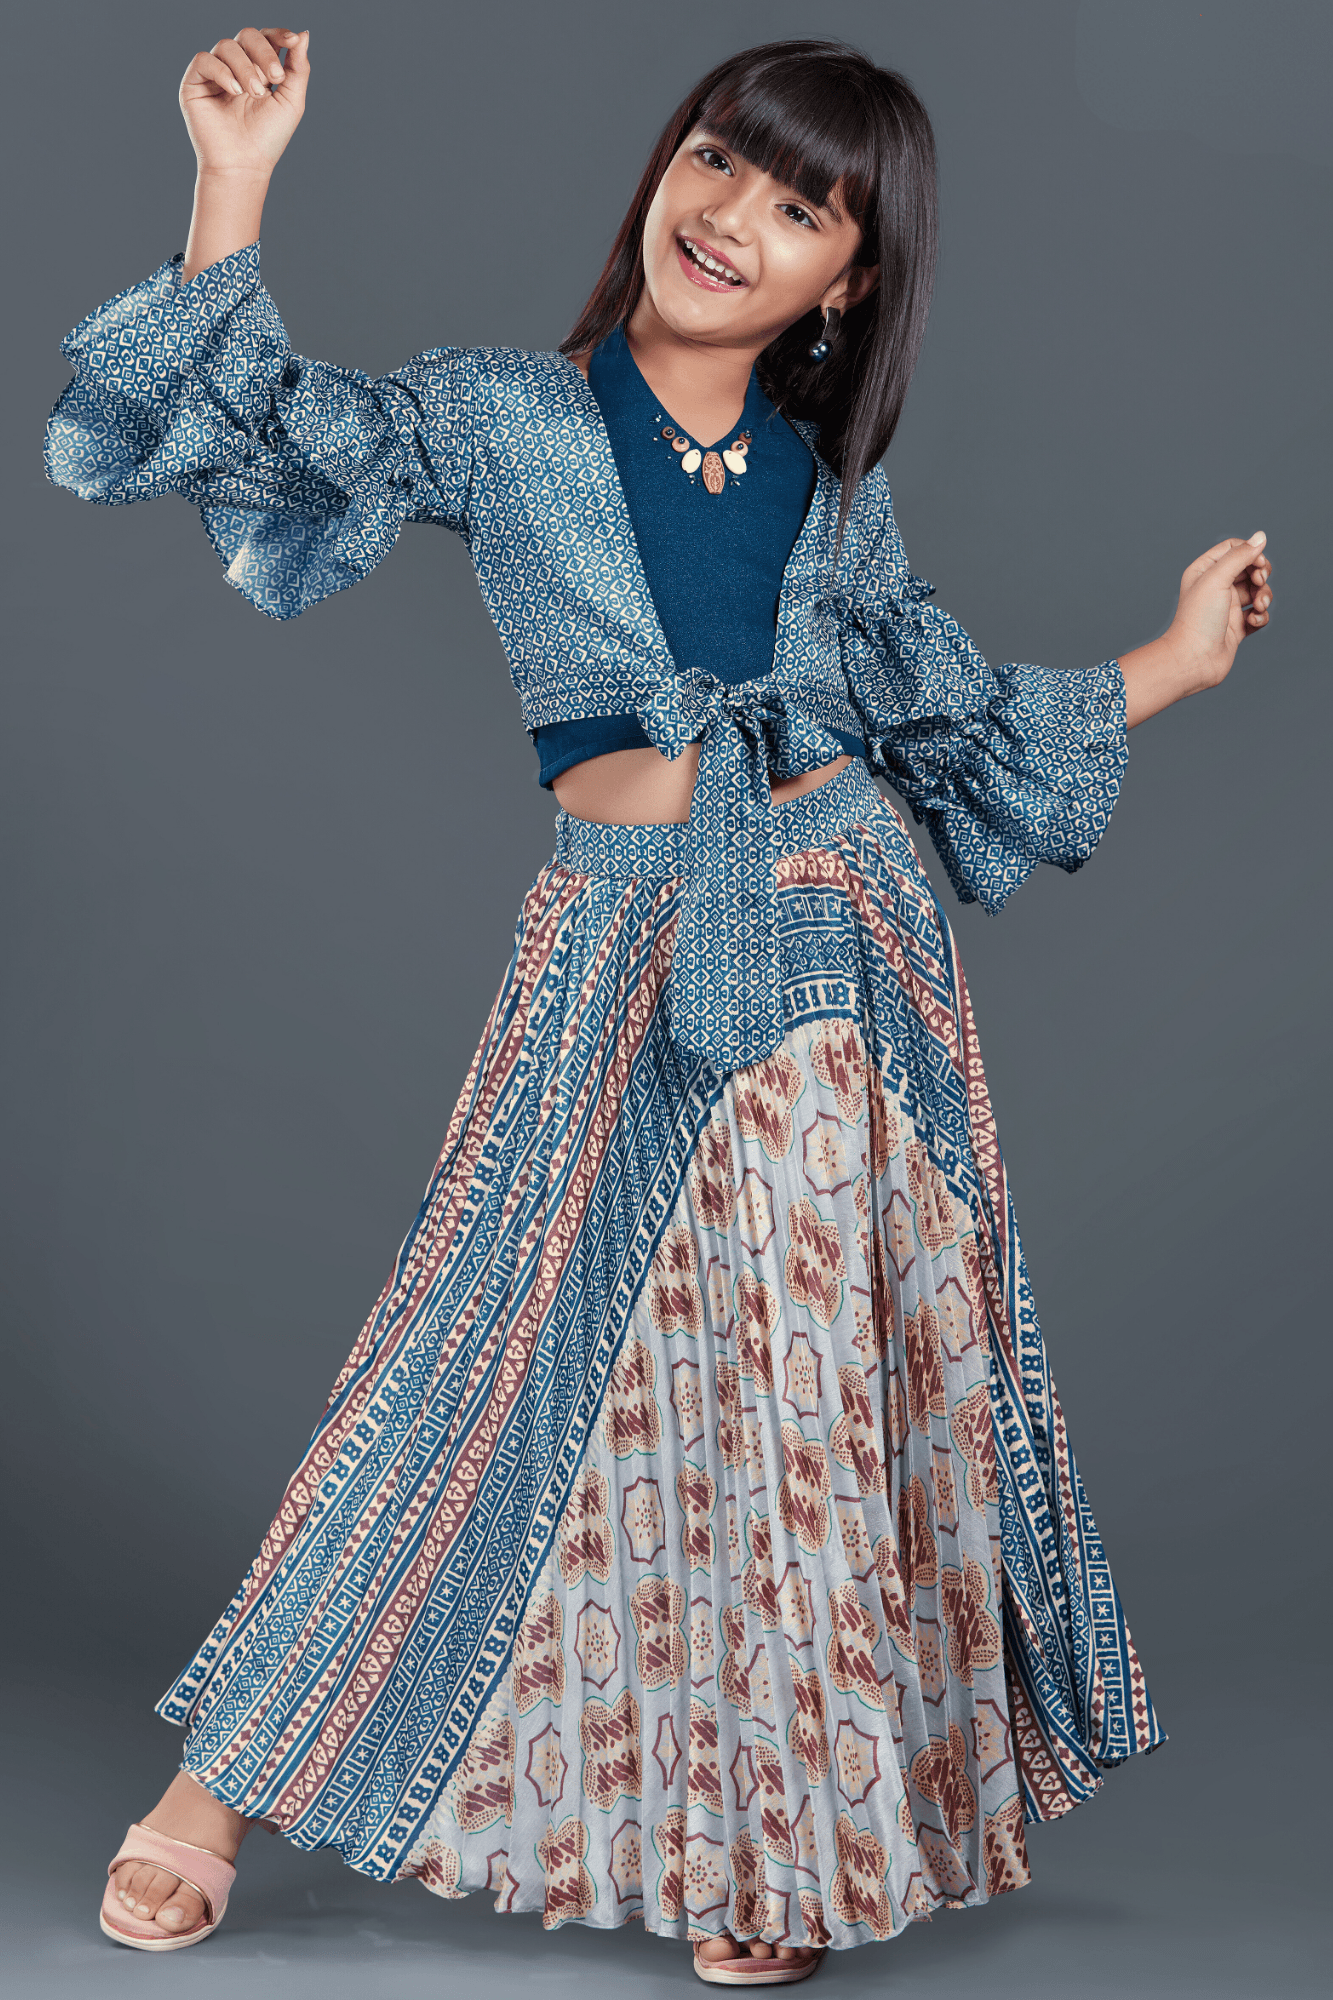 Blue Block Printed Skirt Set With Bulgarian Sleeves Overcoat and Crop Top For Girls - Lagorii Kids